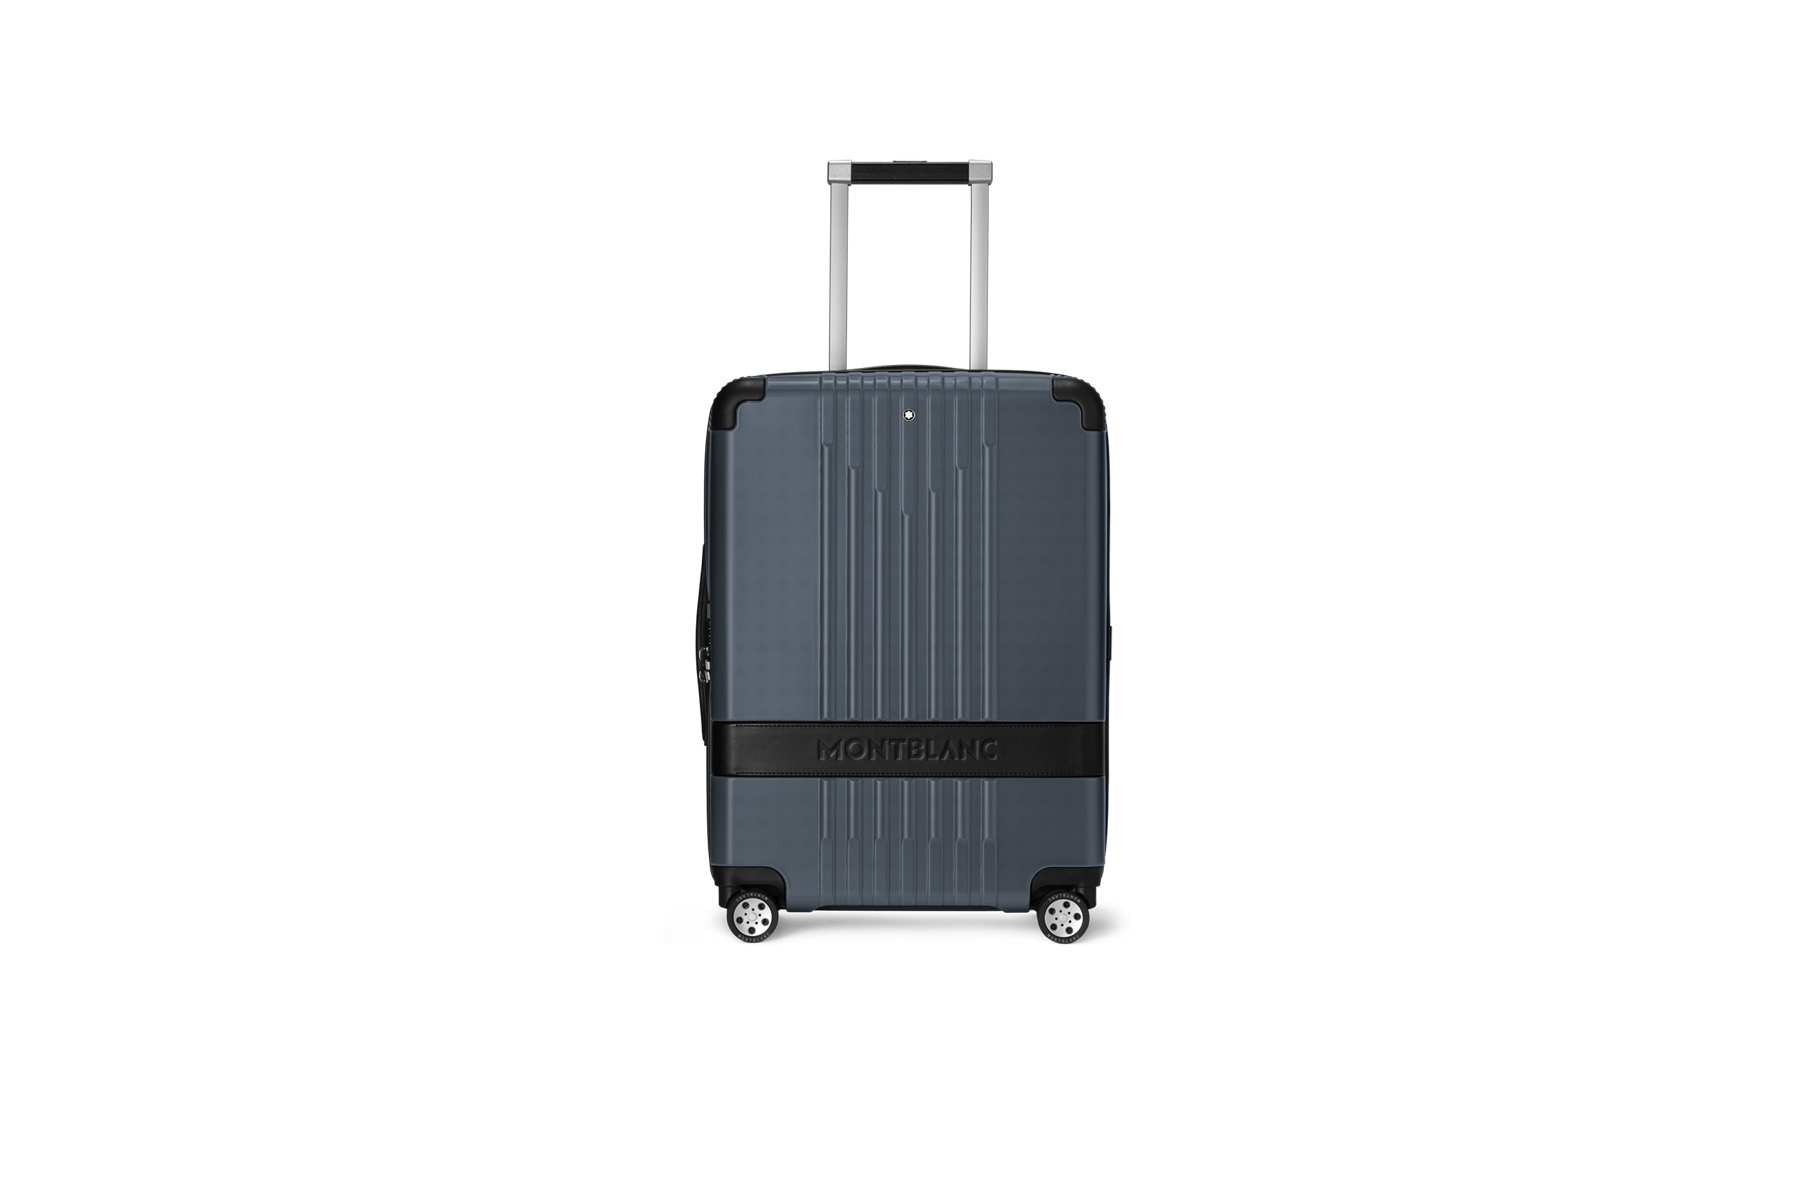 Montblanc expands its #MY4810 luggage collection with new shades of trolleys for business and leisure travellers seeking elegant yet functional travel solutions